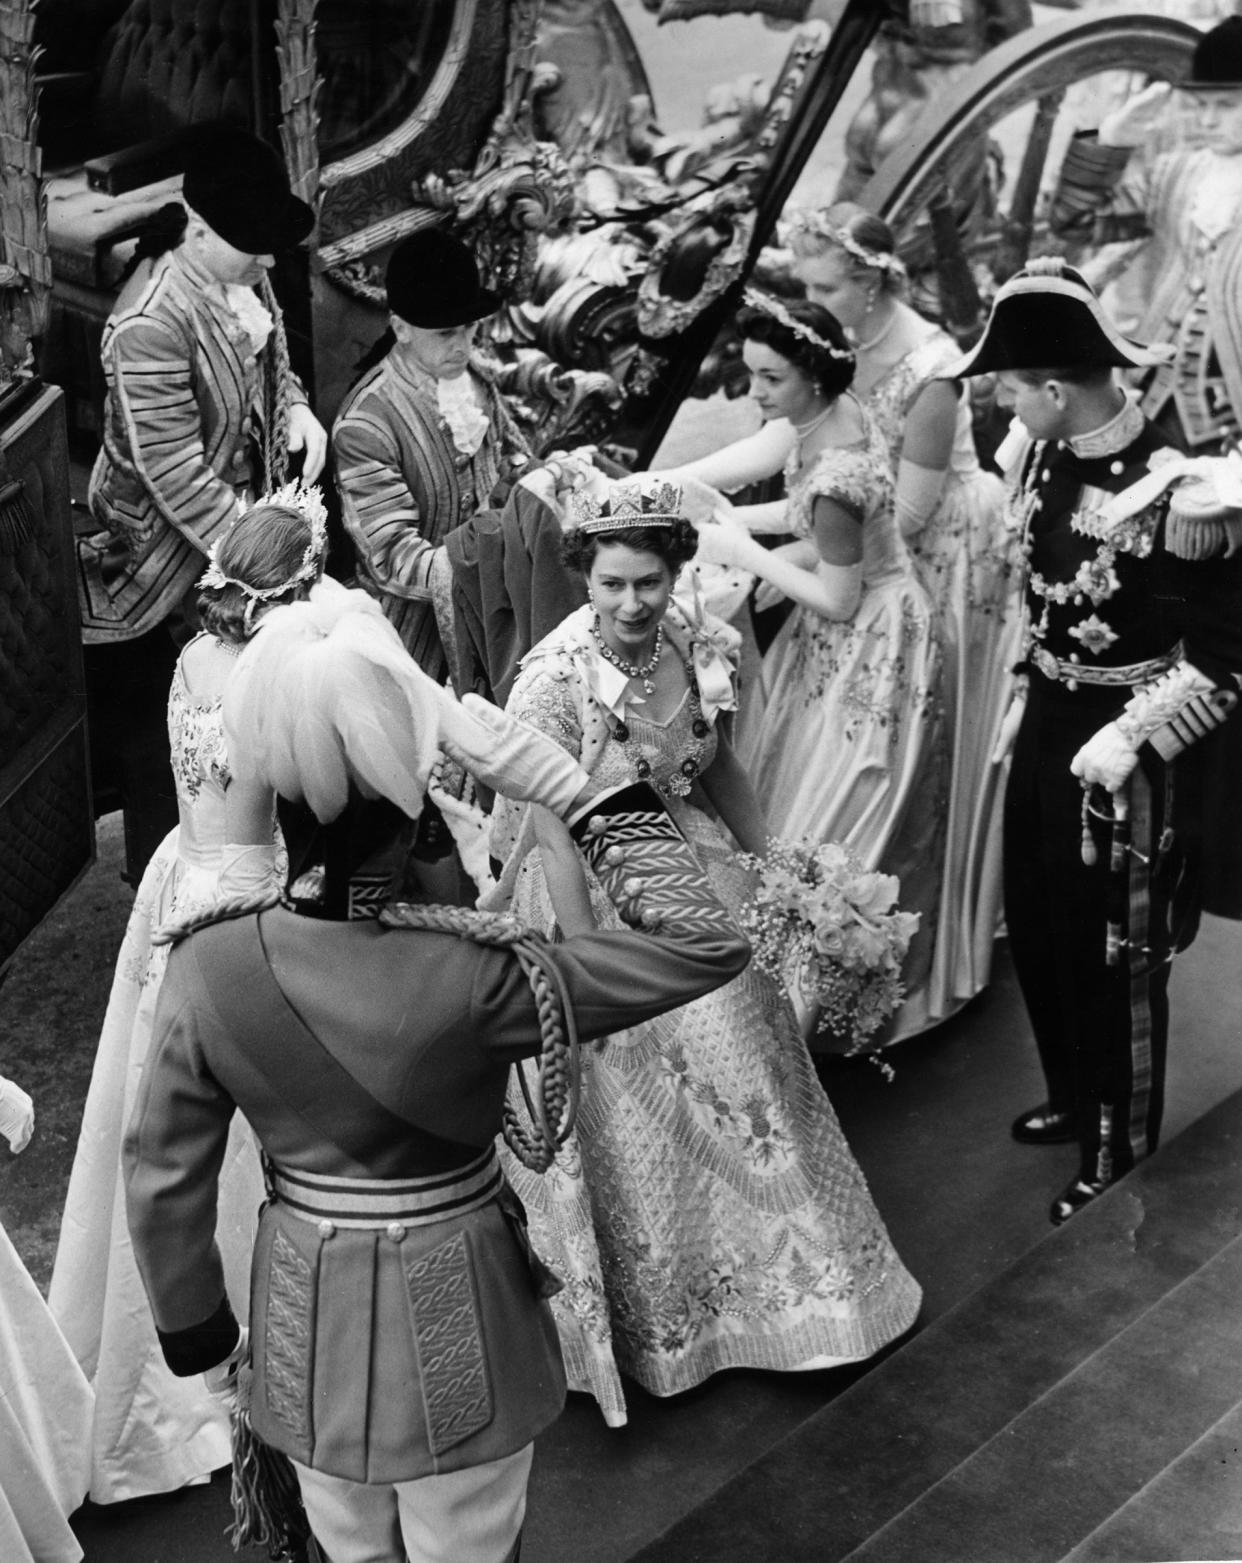 Queen Elizabeth II arrives at Westminster Abbey in the Coronation Coach in 1953.